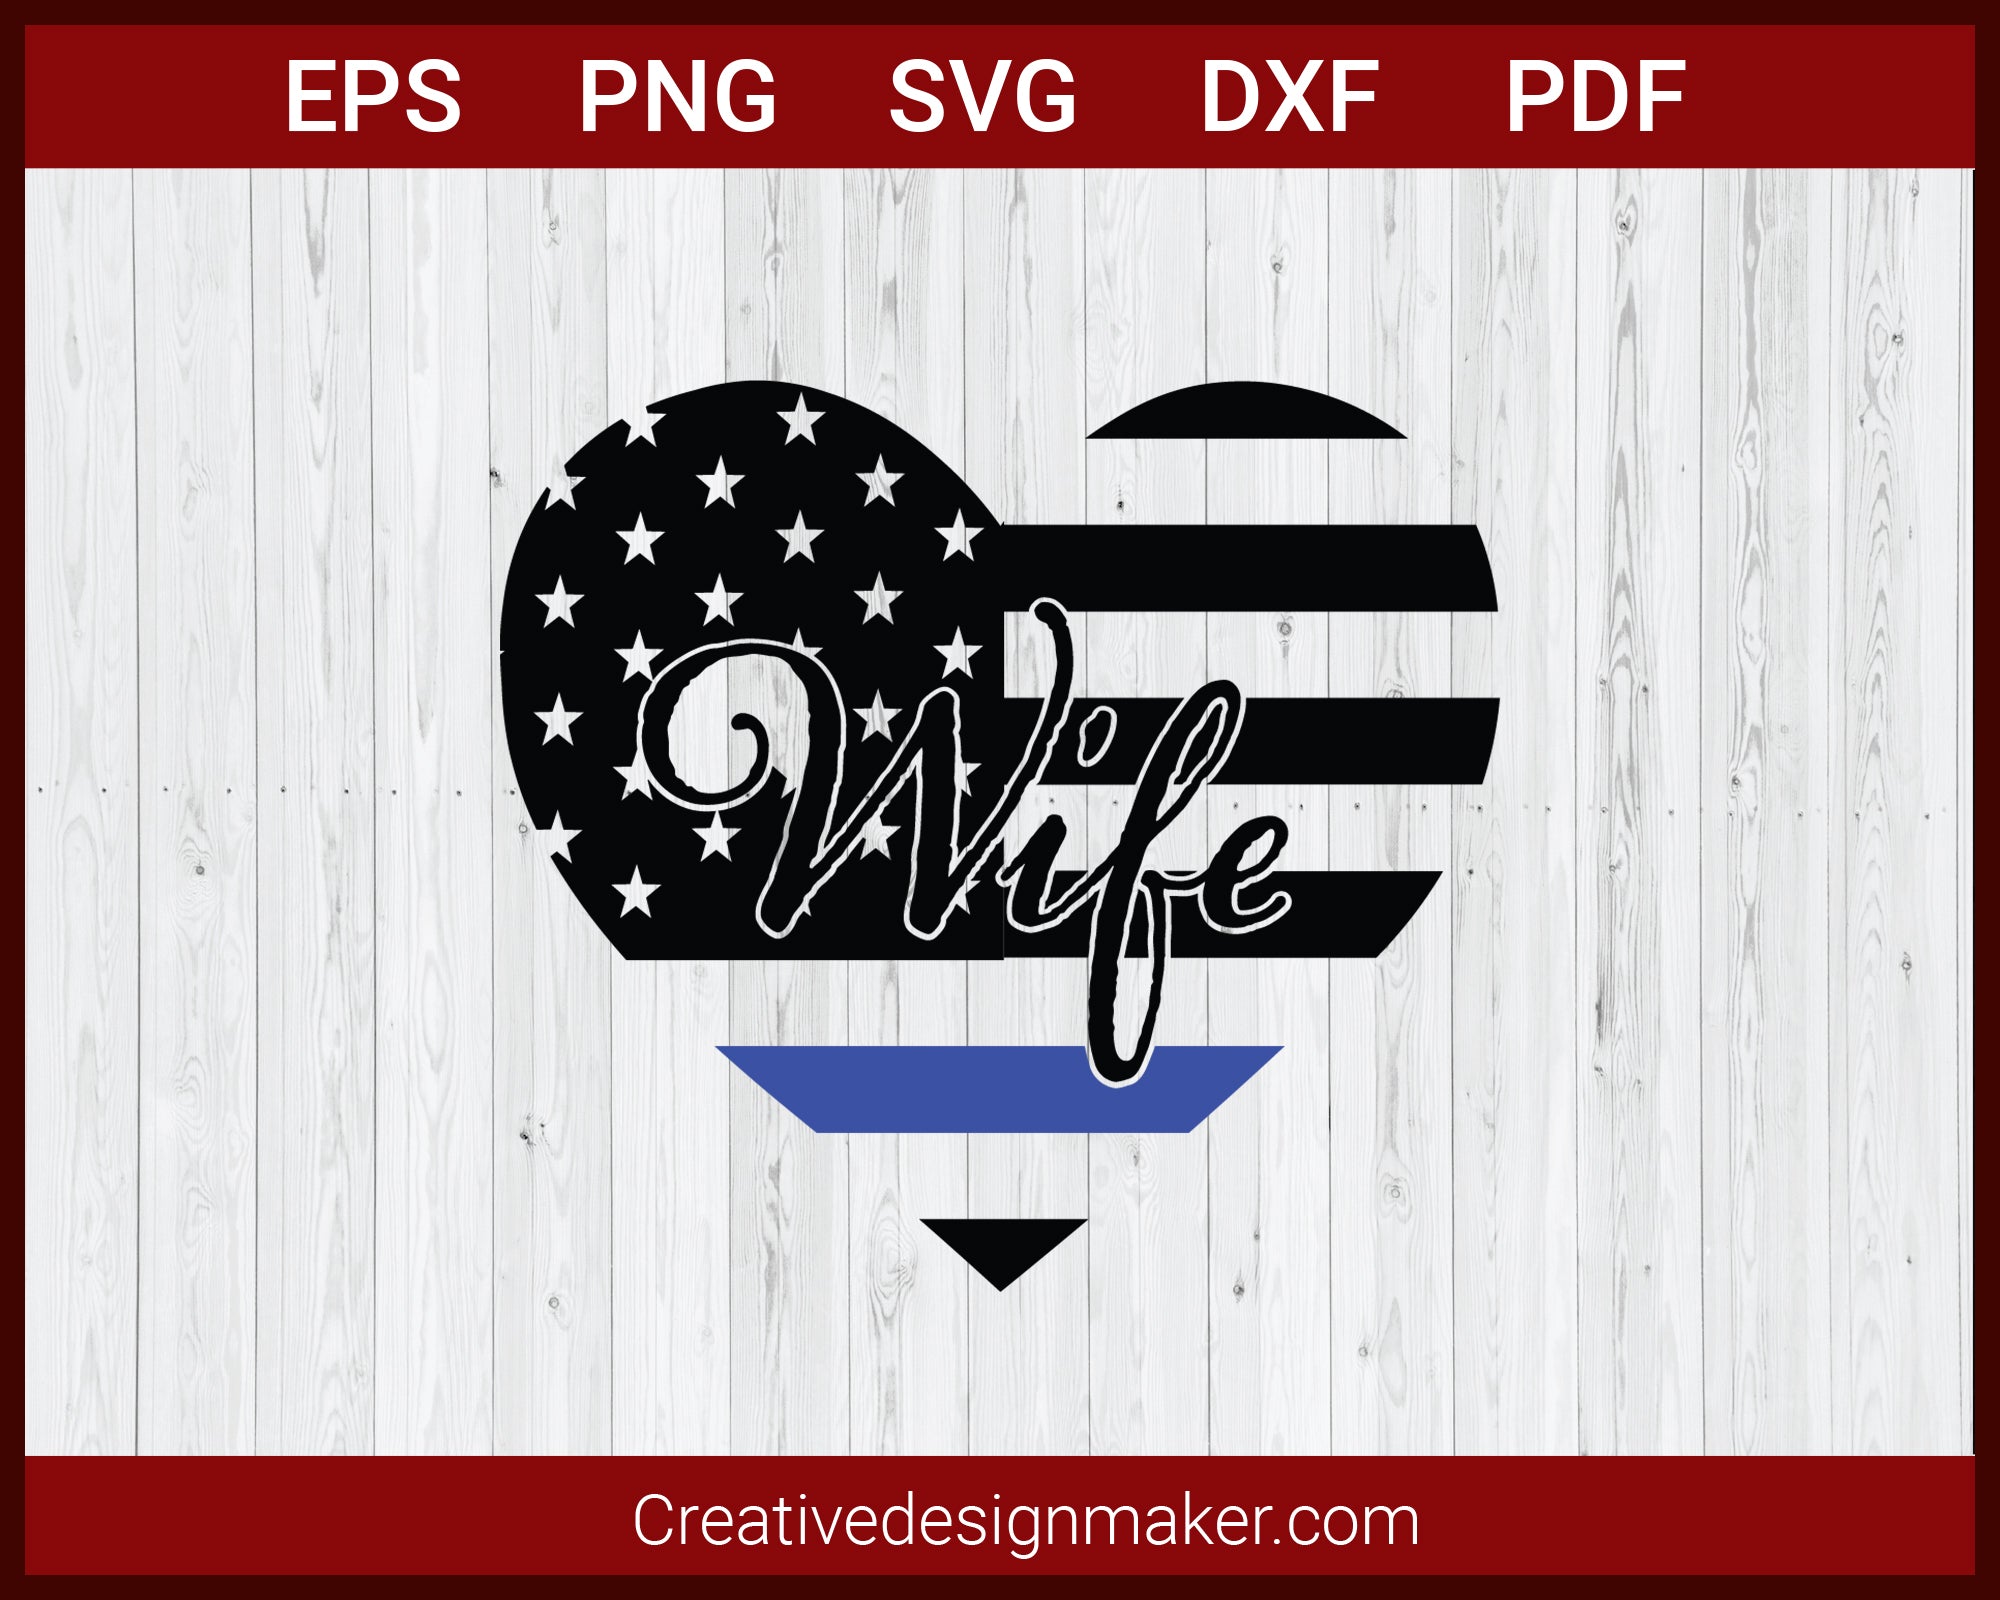 Love Wife Thin Blue Line Police SVG Cricut Silhouette DXF PNG EPS Cut File